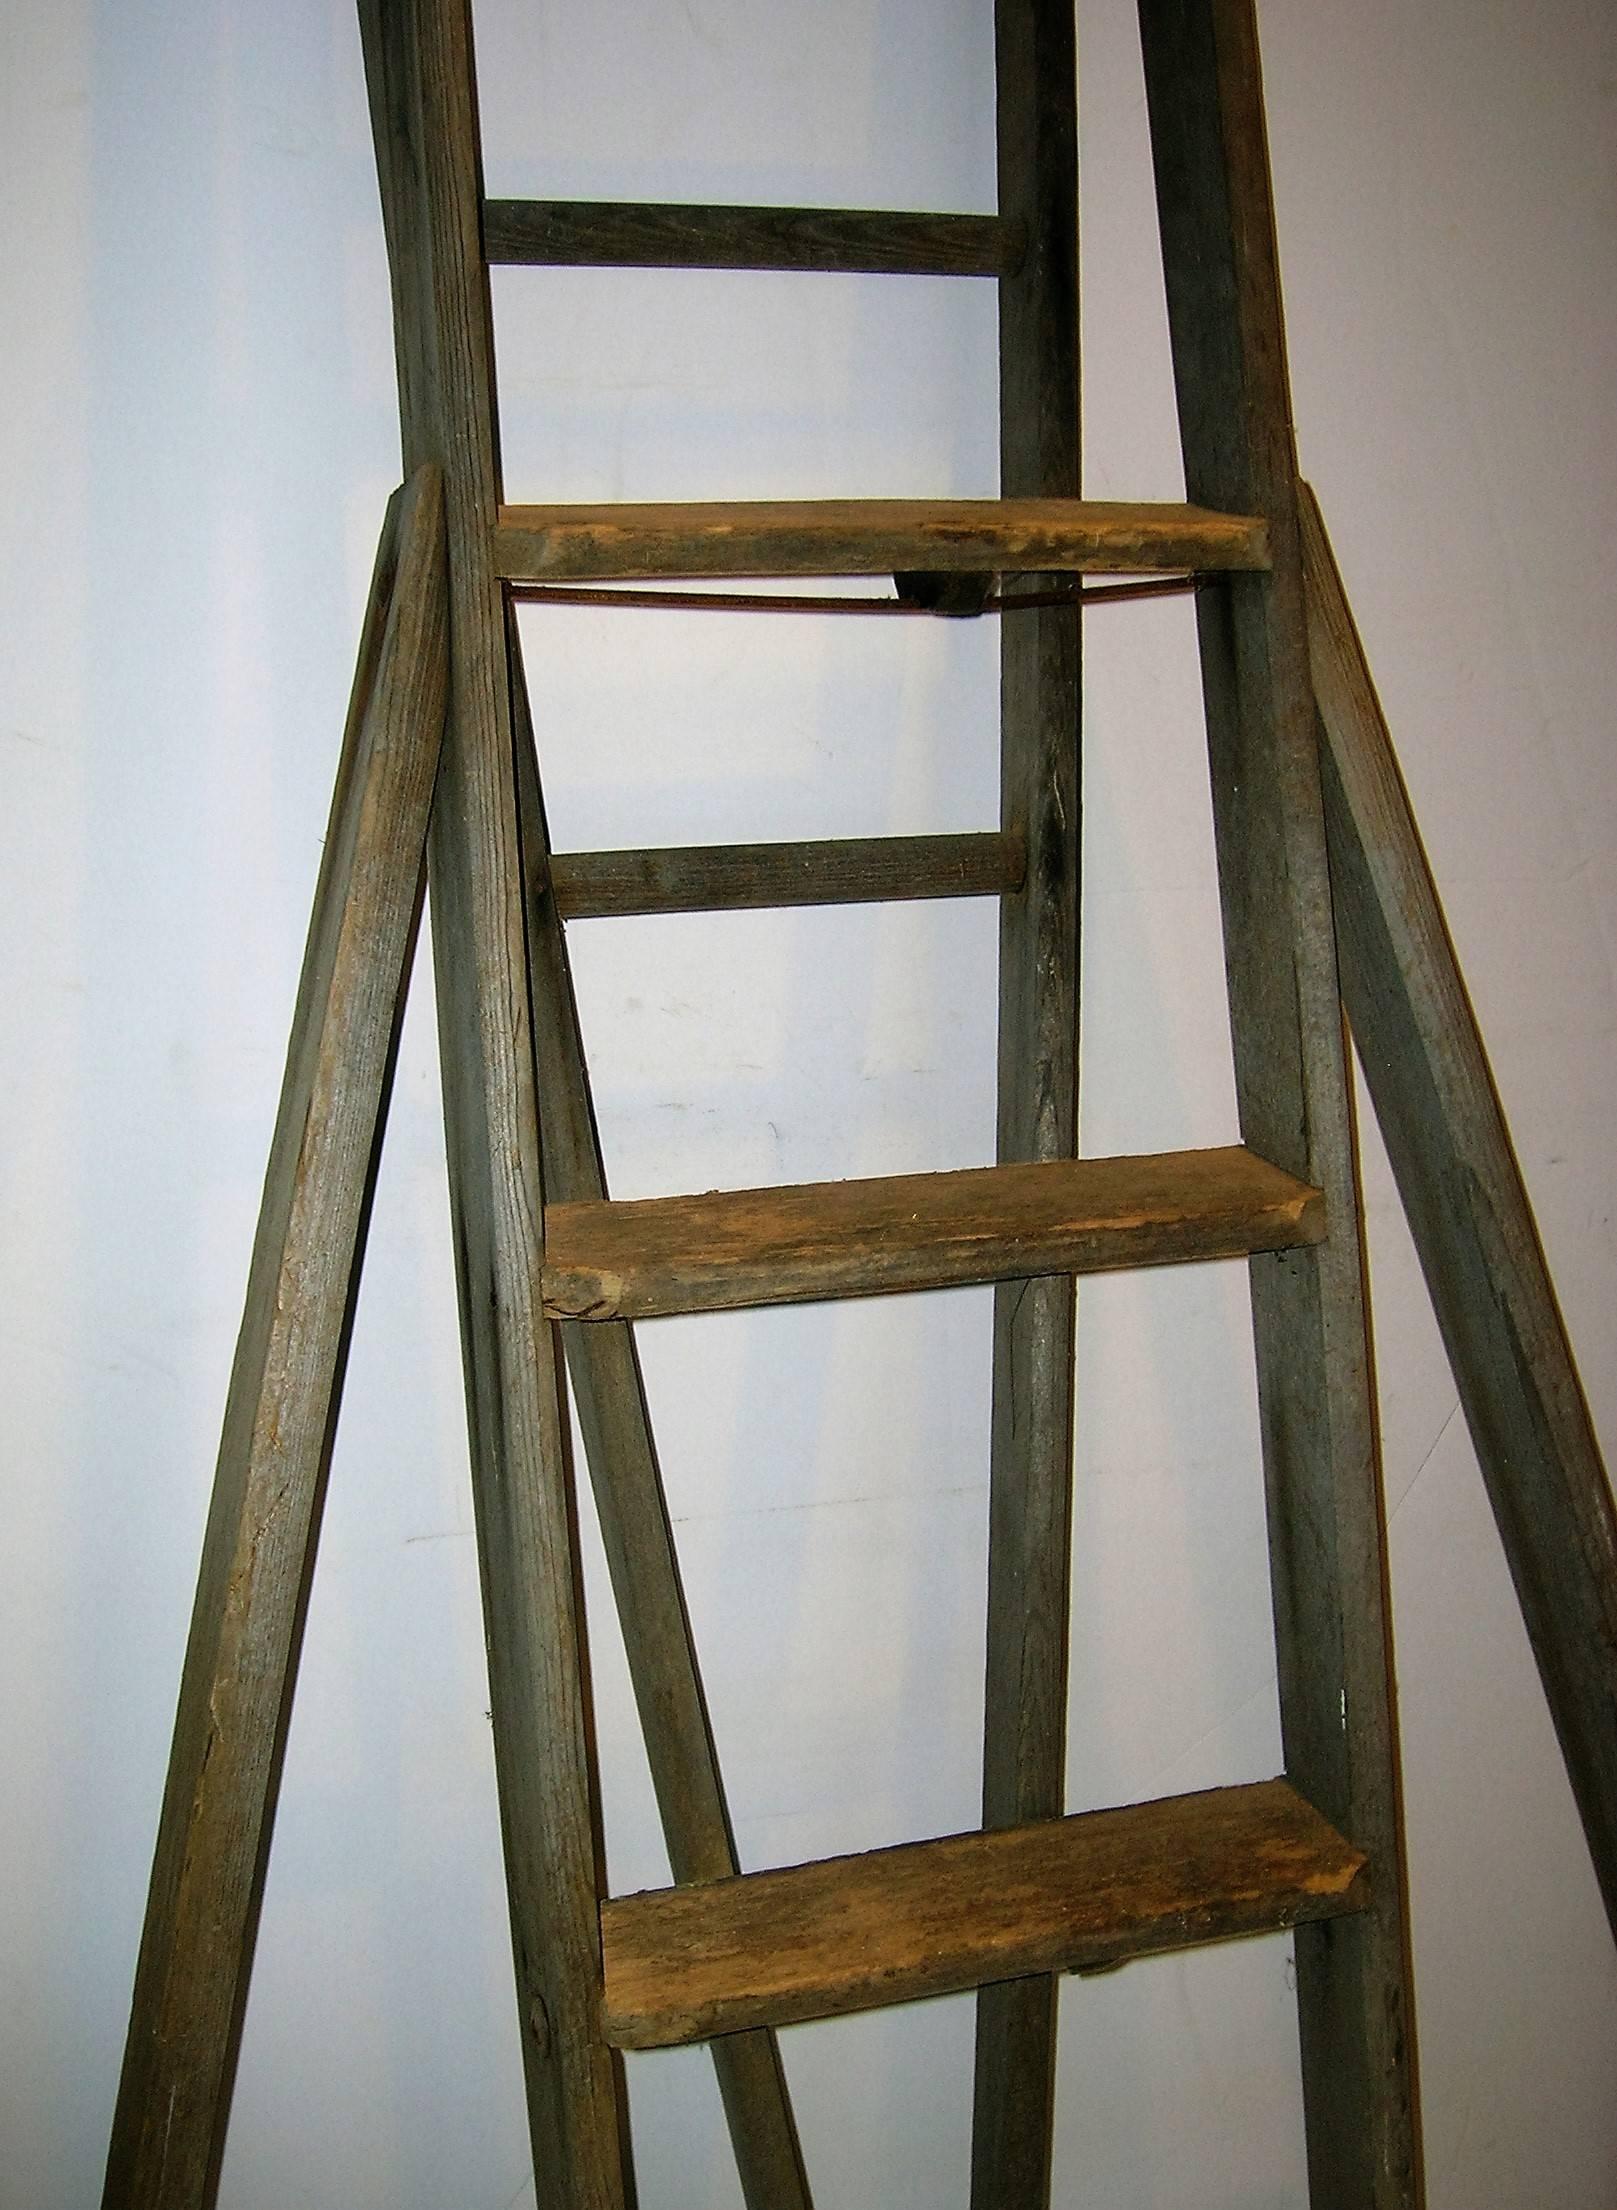 Old folding three legged tripod form fruit picking harvest ladder in original naturally aged worn weathered surface from years of outdoor use at a Western NY State orchard.